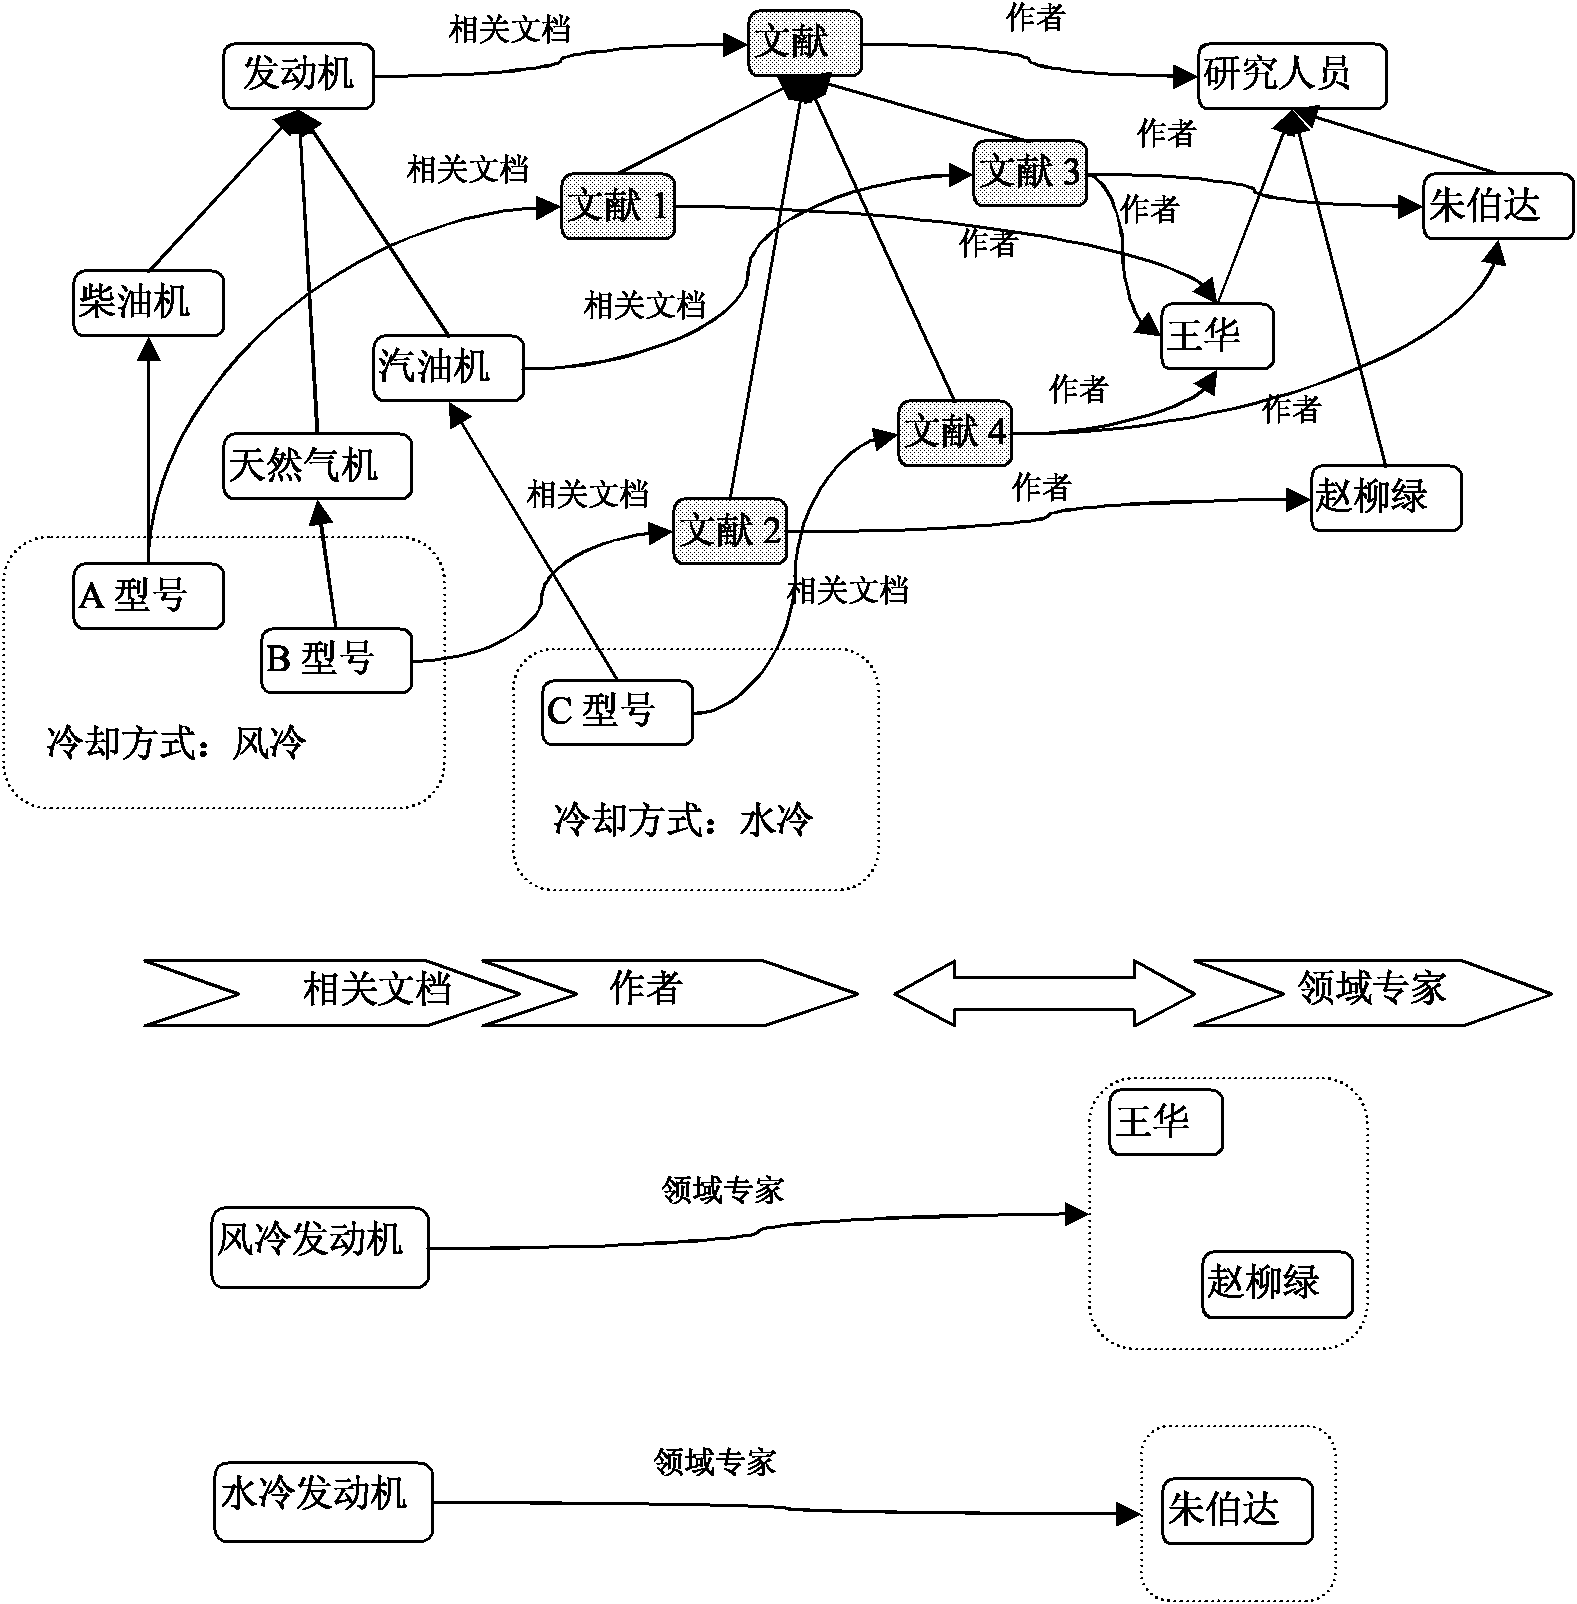 Ontology-based knowledge map drawing system